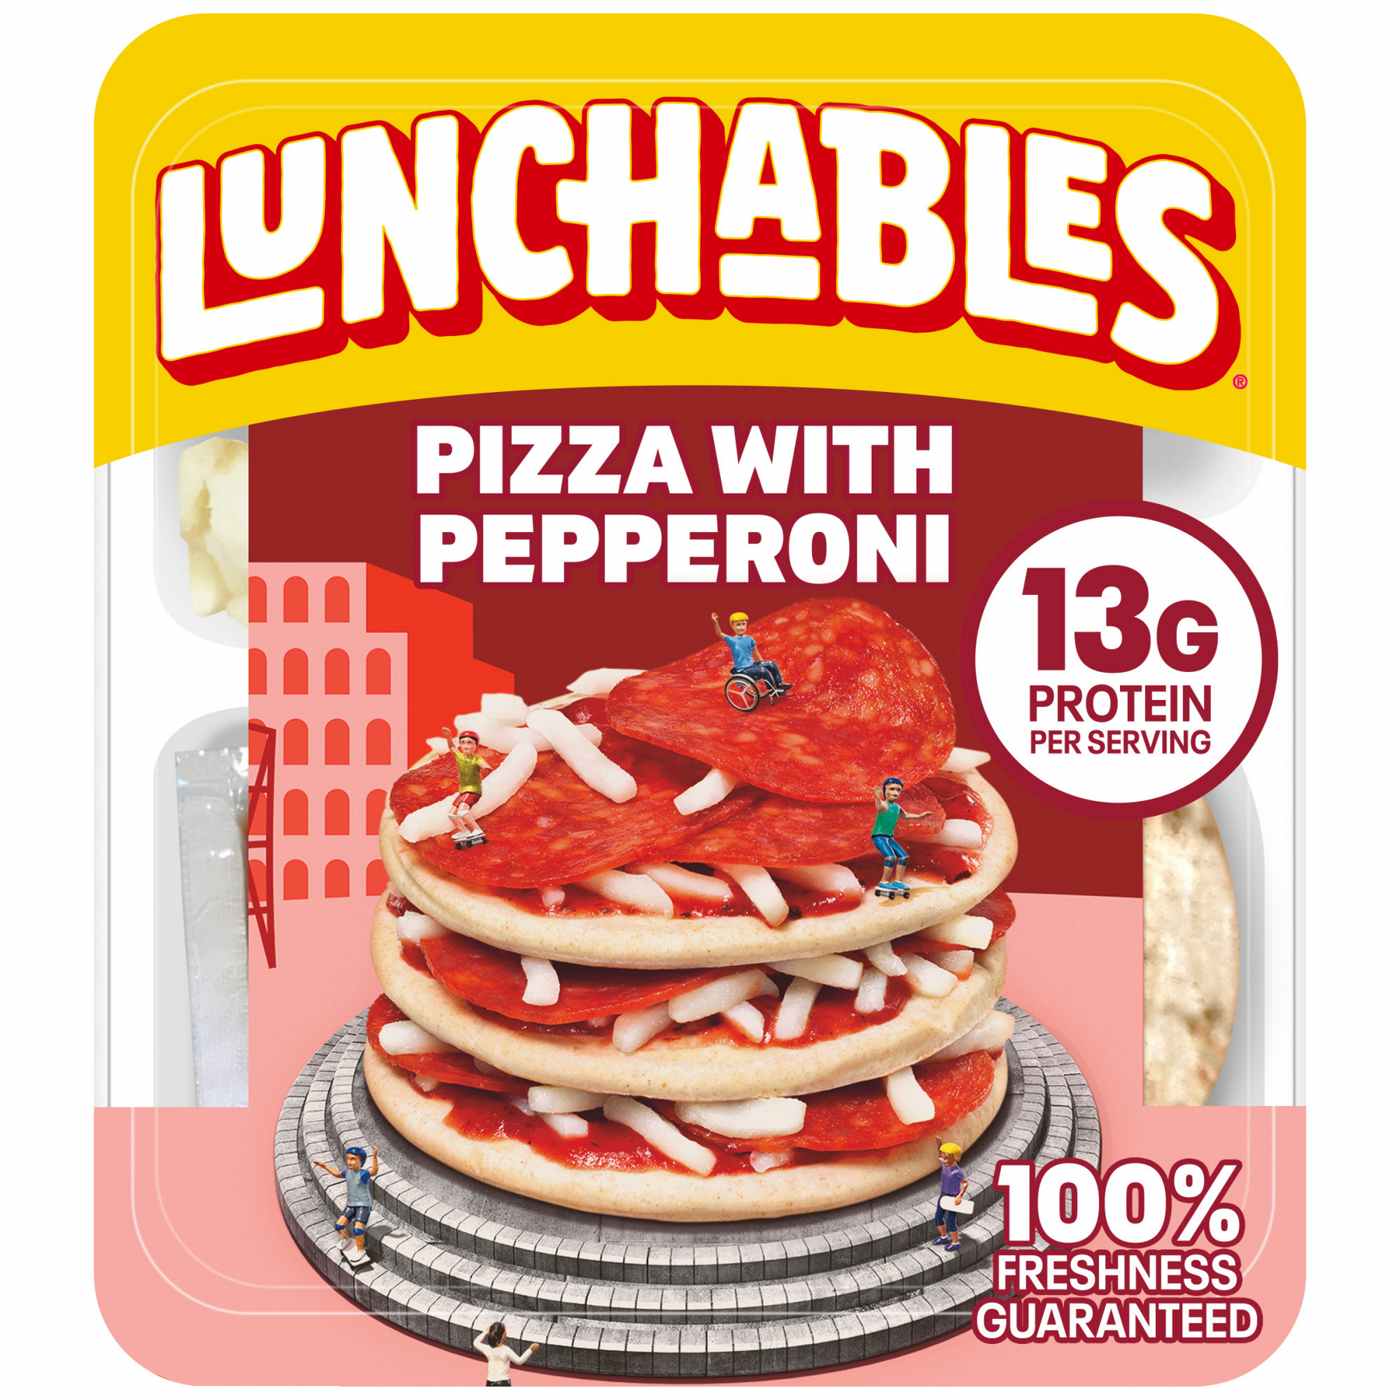 Lunchables Snack Kit Tray - Pizza with Pepperoni; image 1 of 6